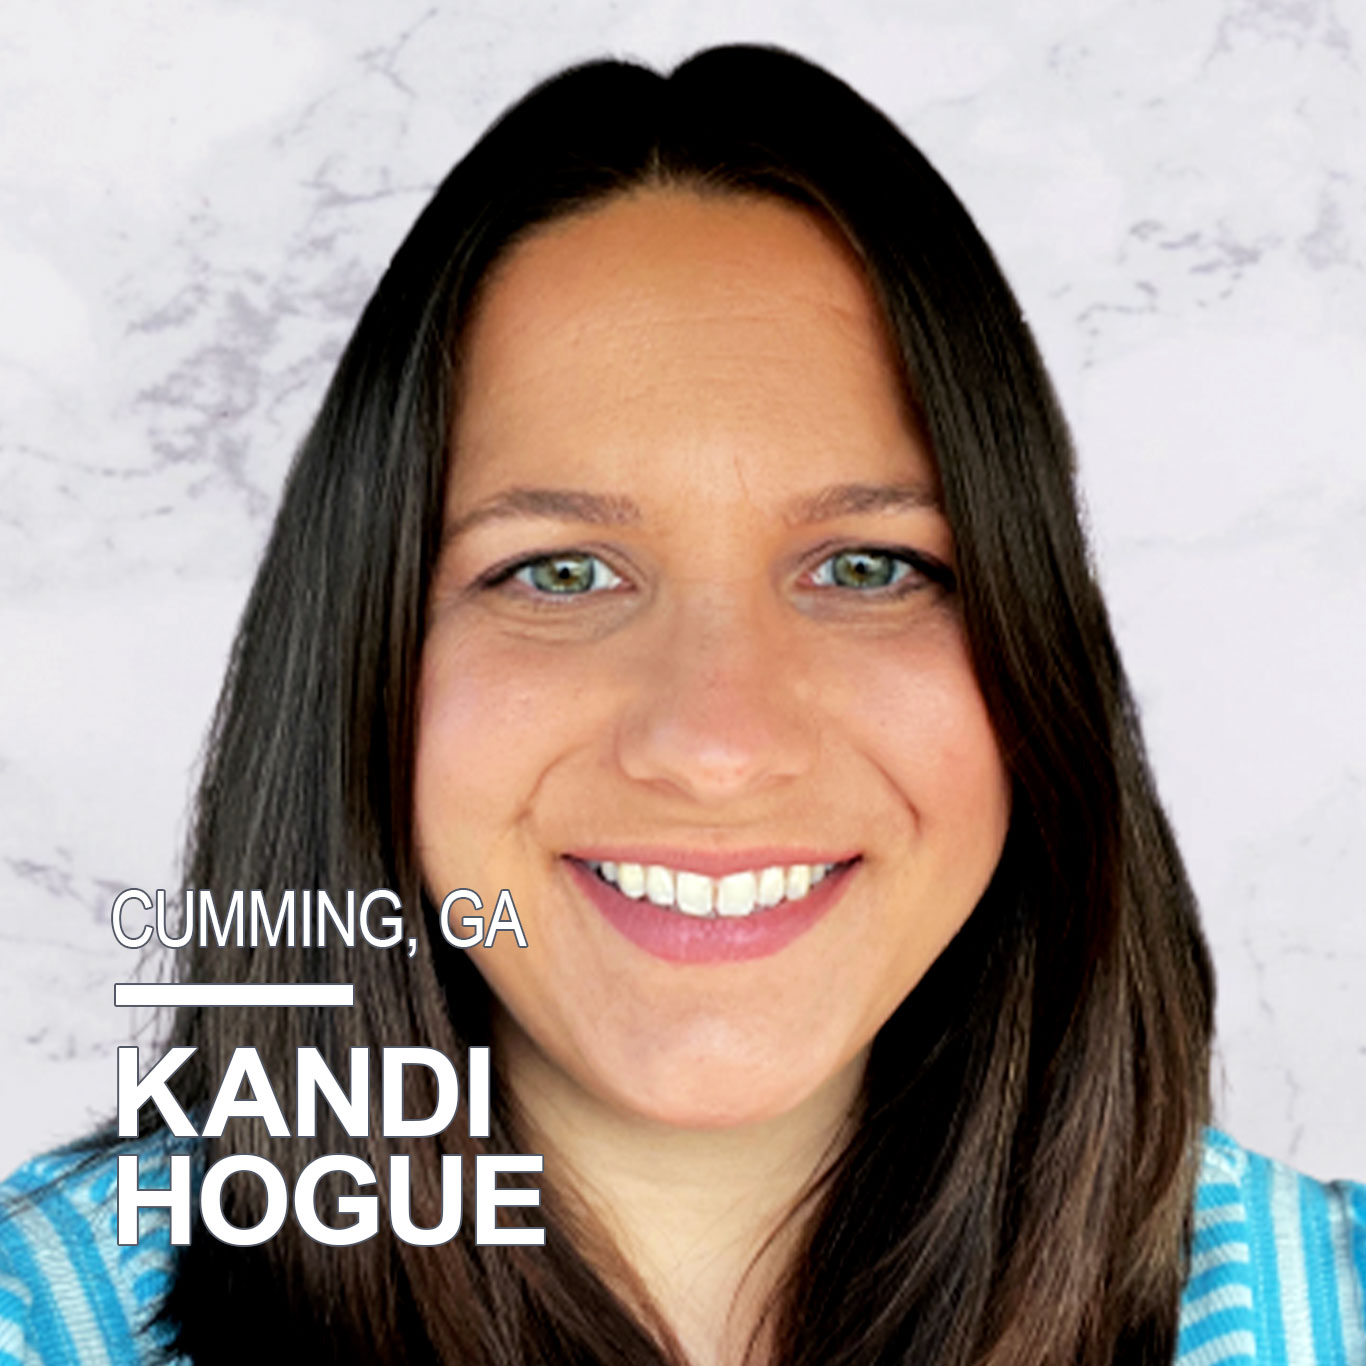 Kandi Hogue, currently a STEM teacher at Daves Creek Elementary in Cumming, GA, has been in education for 15 years, serving as an early childhood teacher, teacher mentor, and STEM certification liaison. She holds a bachelor’s degree in Early Childhood Education, master’s degrees in Curriculum and Instruction and Educational Leadership, and STEM and ESOL endorsements. She’s proud to be an educator and bring STEM learning to her students while providing hands-on instruction that makes science come to life. Kandi is passionate about increasing women in STEM and helping students find their own passion.